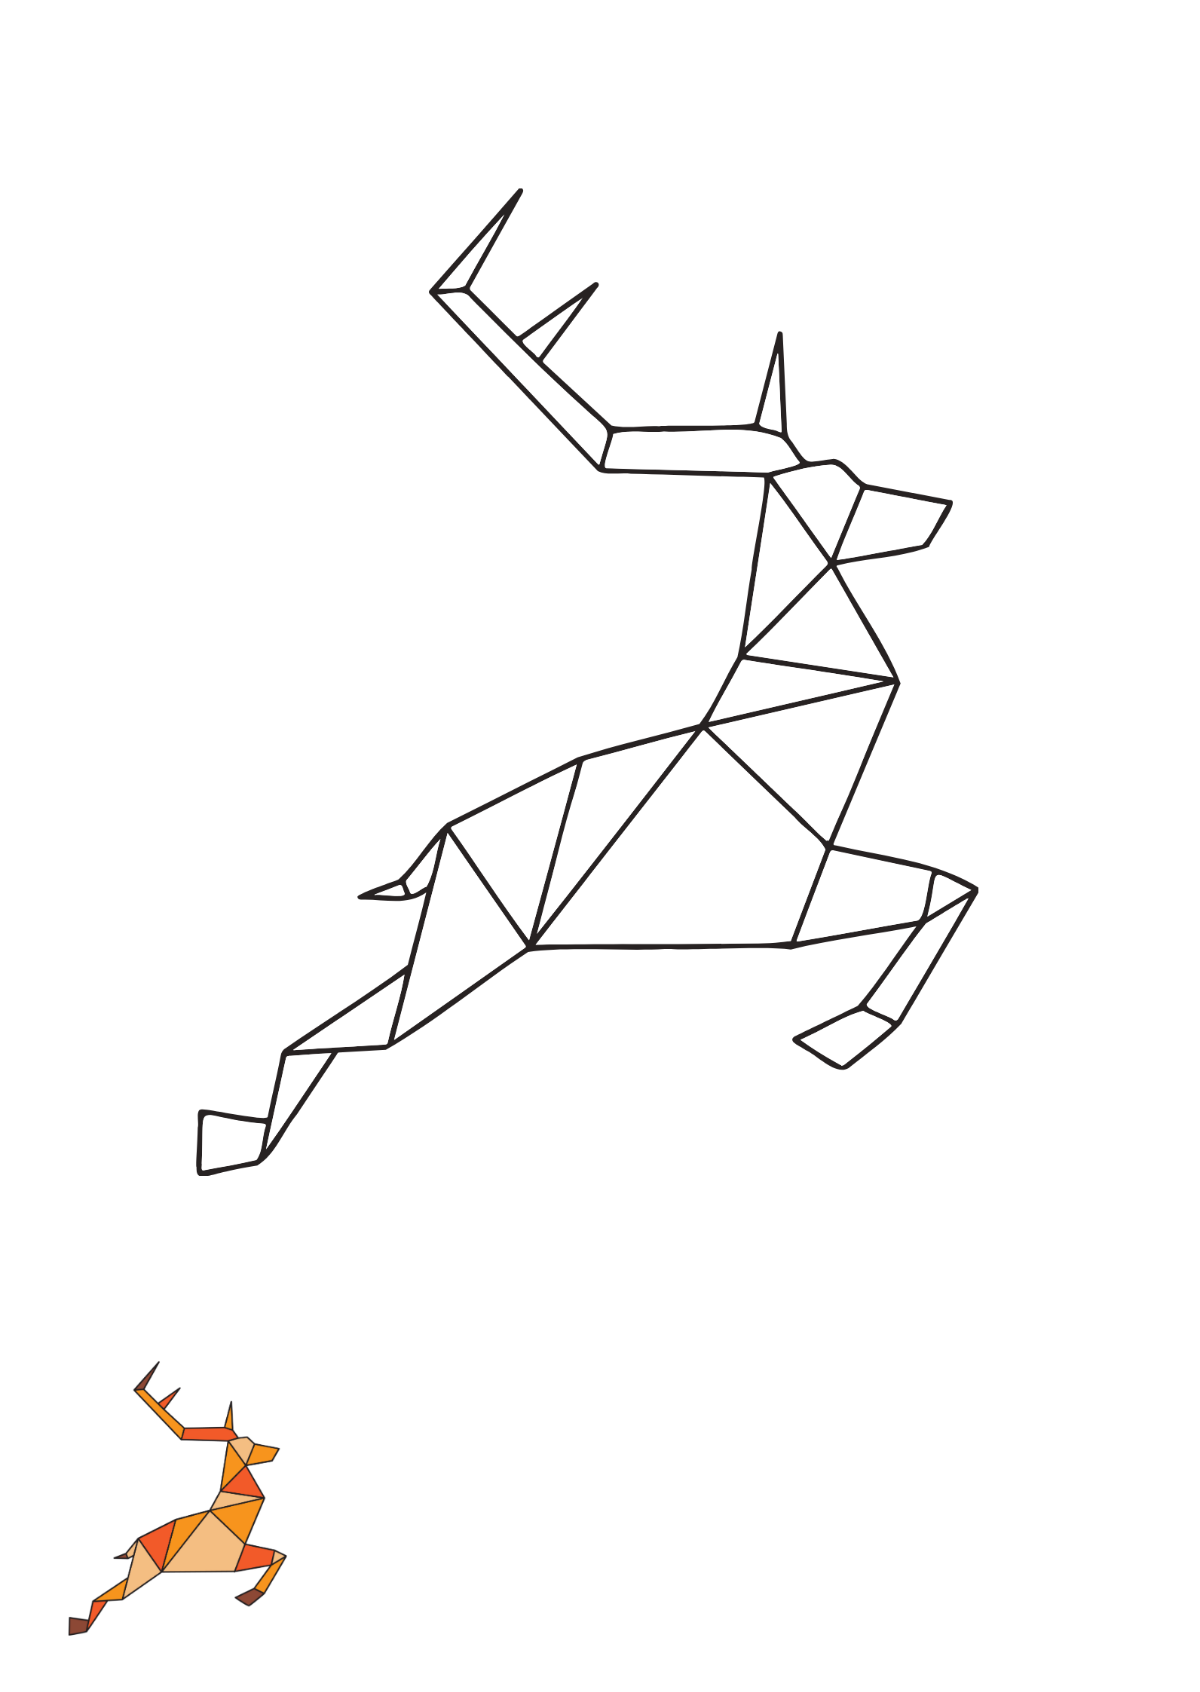 Free Origami Deer Coloring Page Template